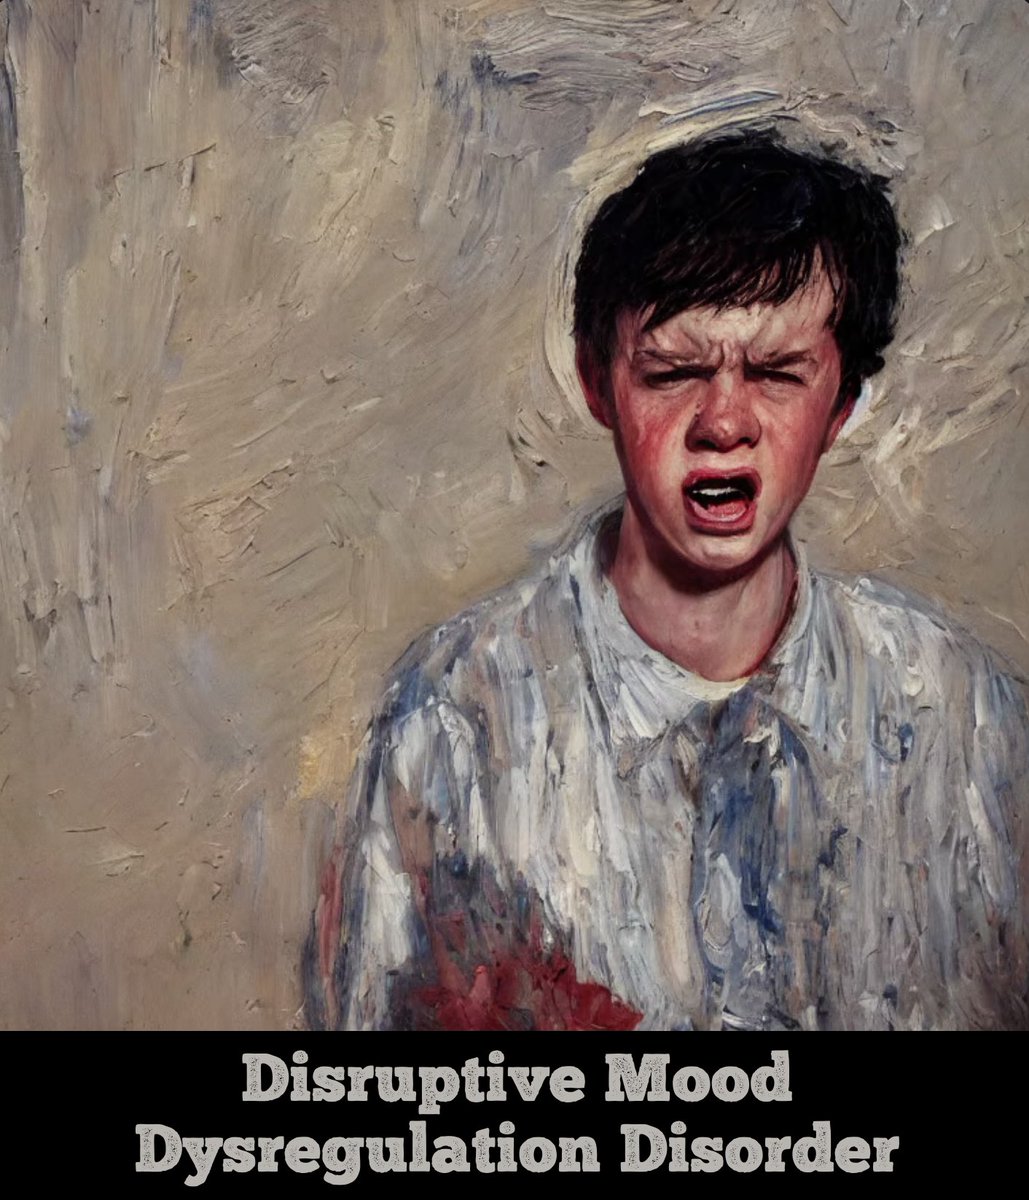 Disruptive Mood Dysregulation is a disorder we know little about. New consensus recommends #therapy first:
pubmed.ncbi.nlm.nih.gov/38260796

For meds, treat other disorders 1st, then consider fluoxetine, methylphenidate, oxcarbazepine… antipsychotics as a last resort

#childmentalhealth